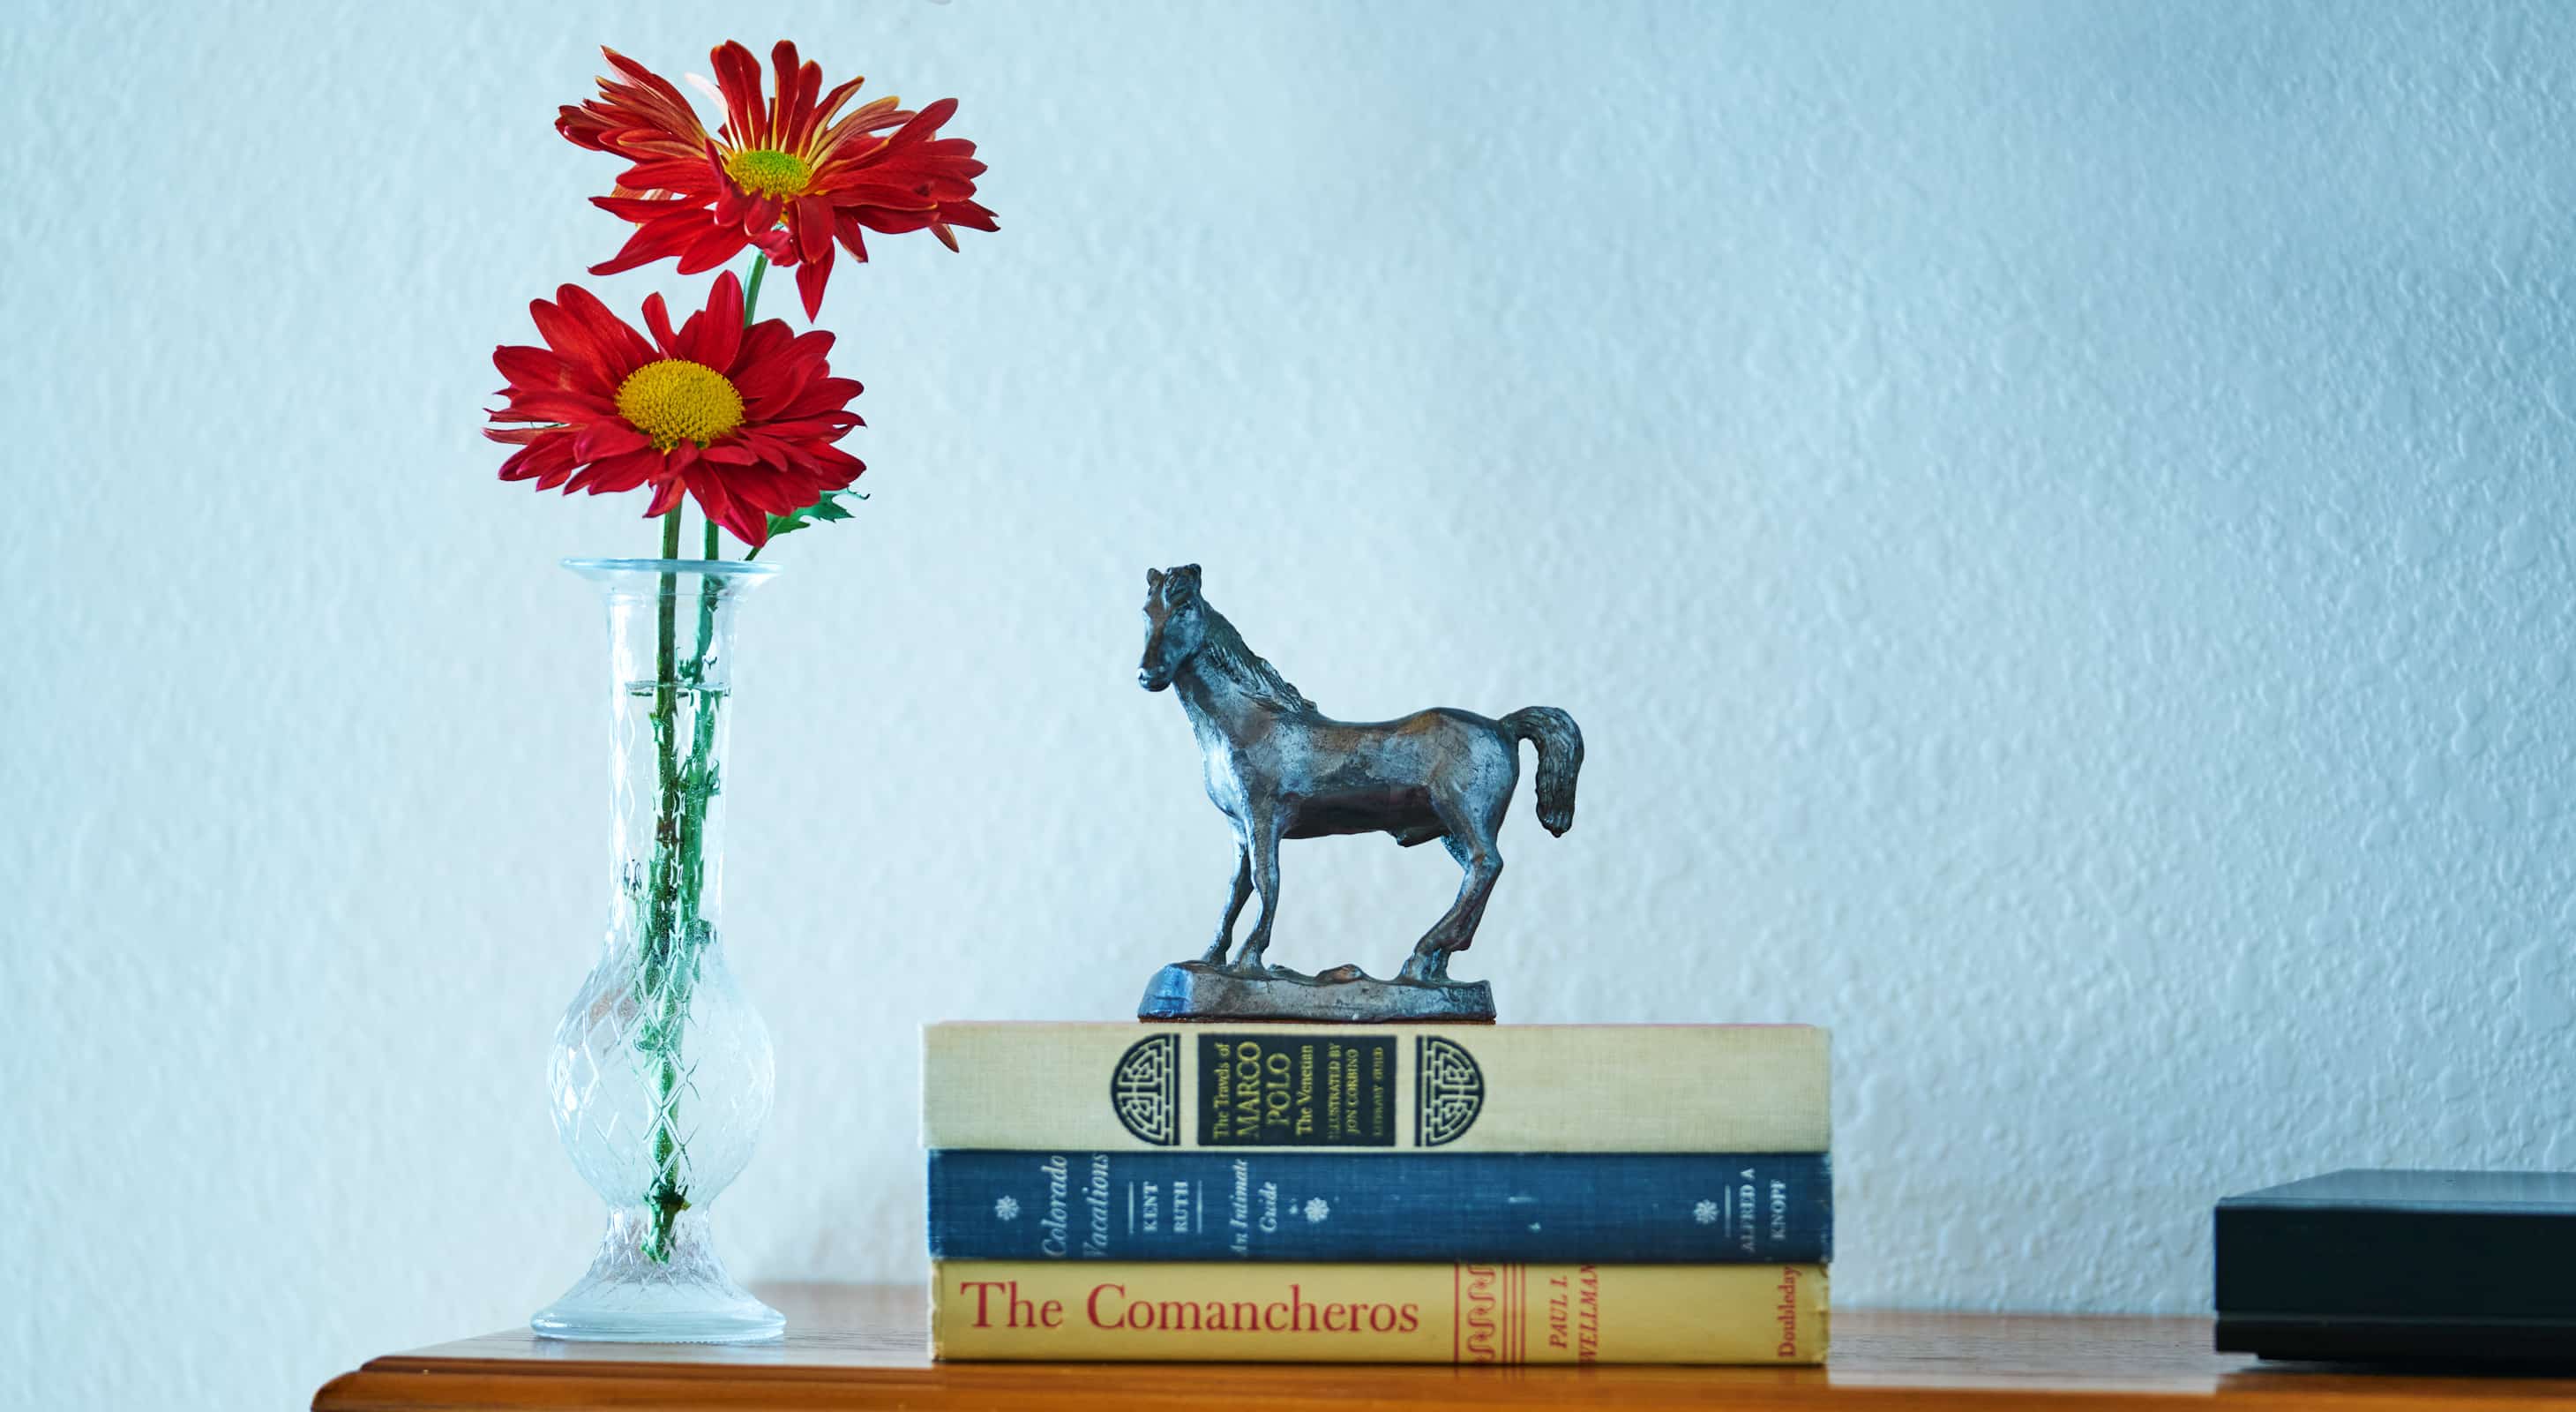 A small flower vase and a stack a books